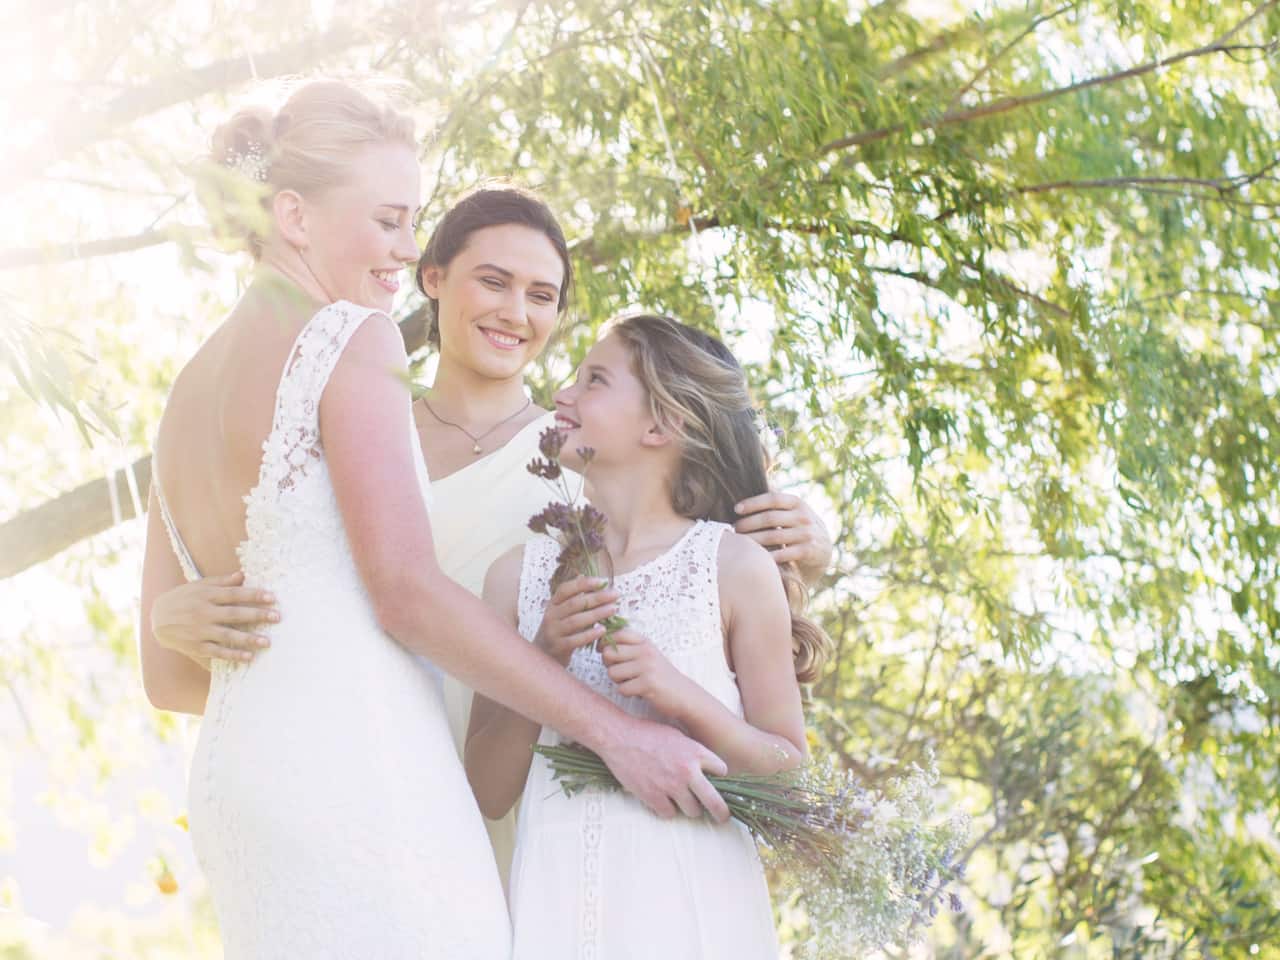 Three bridesmaids smiling and holding flowers